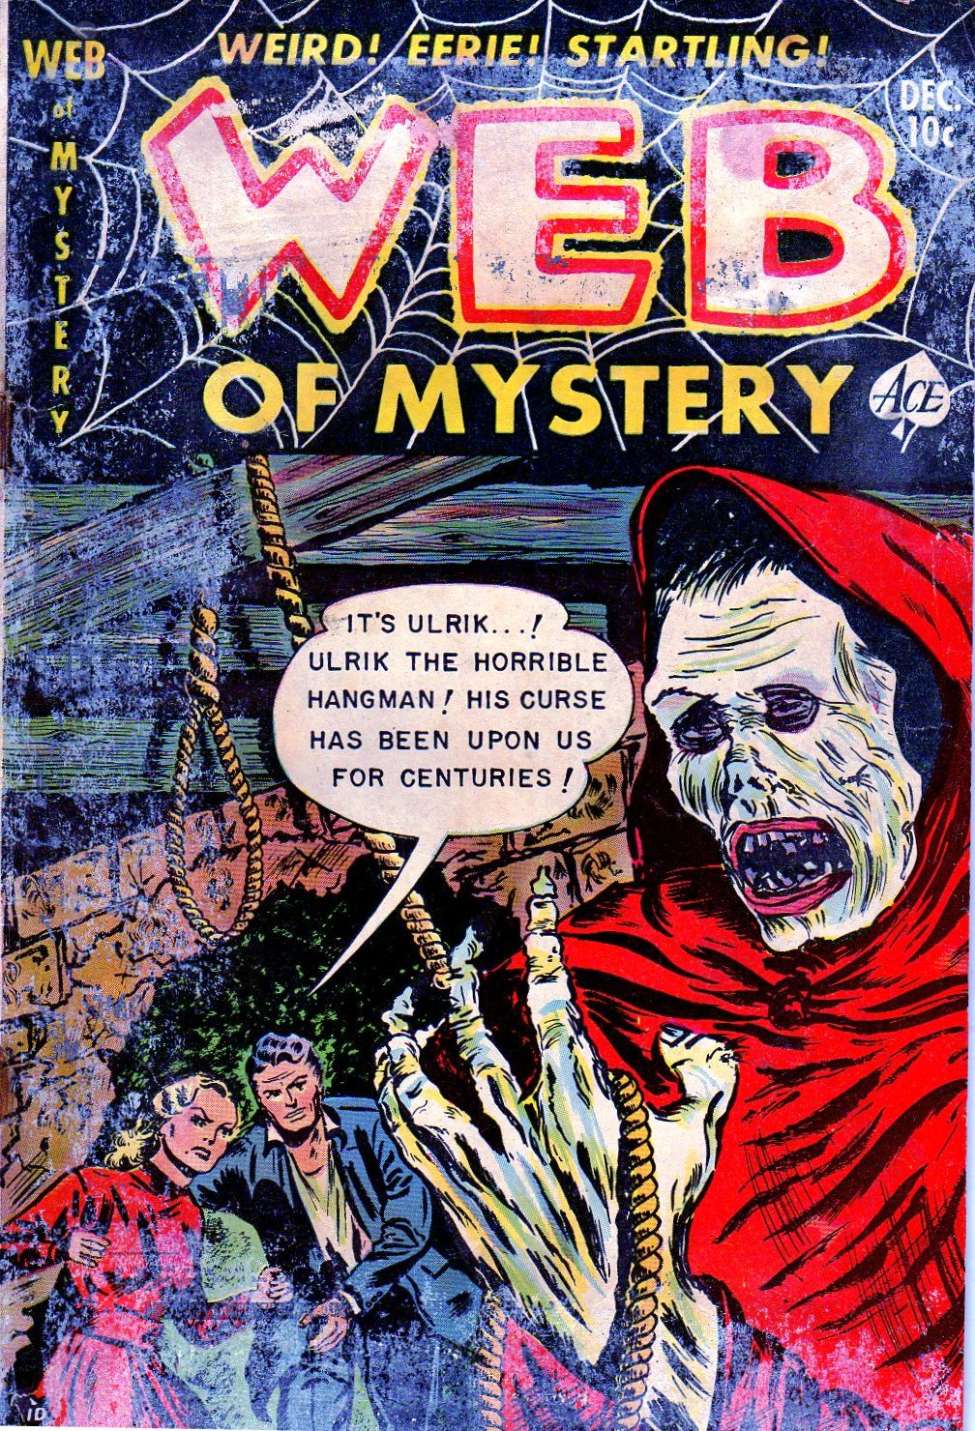 Book Cover For Web of Mystery 16